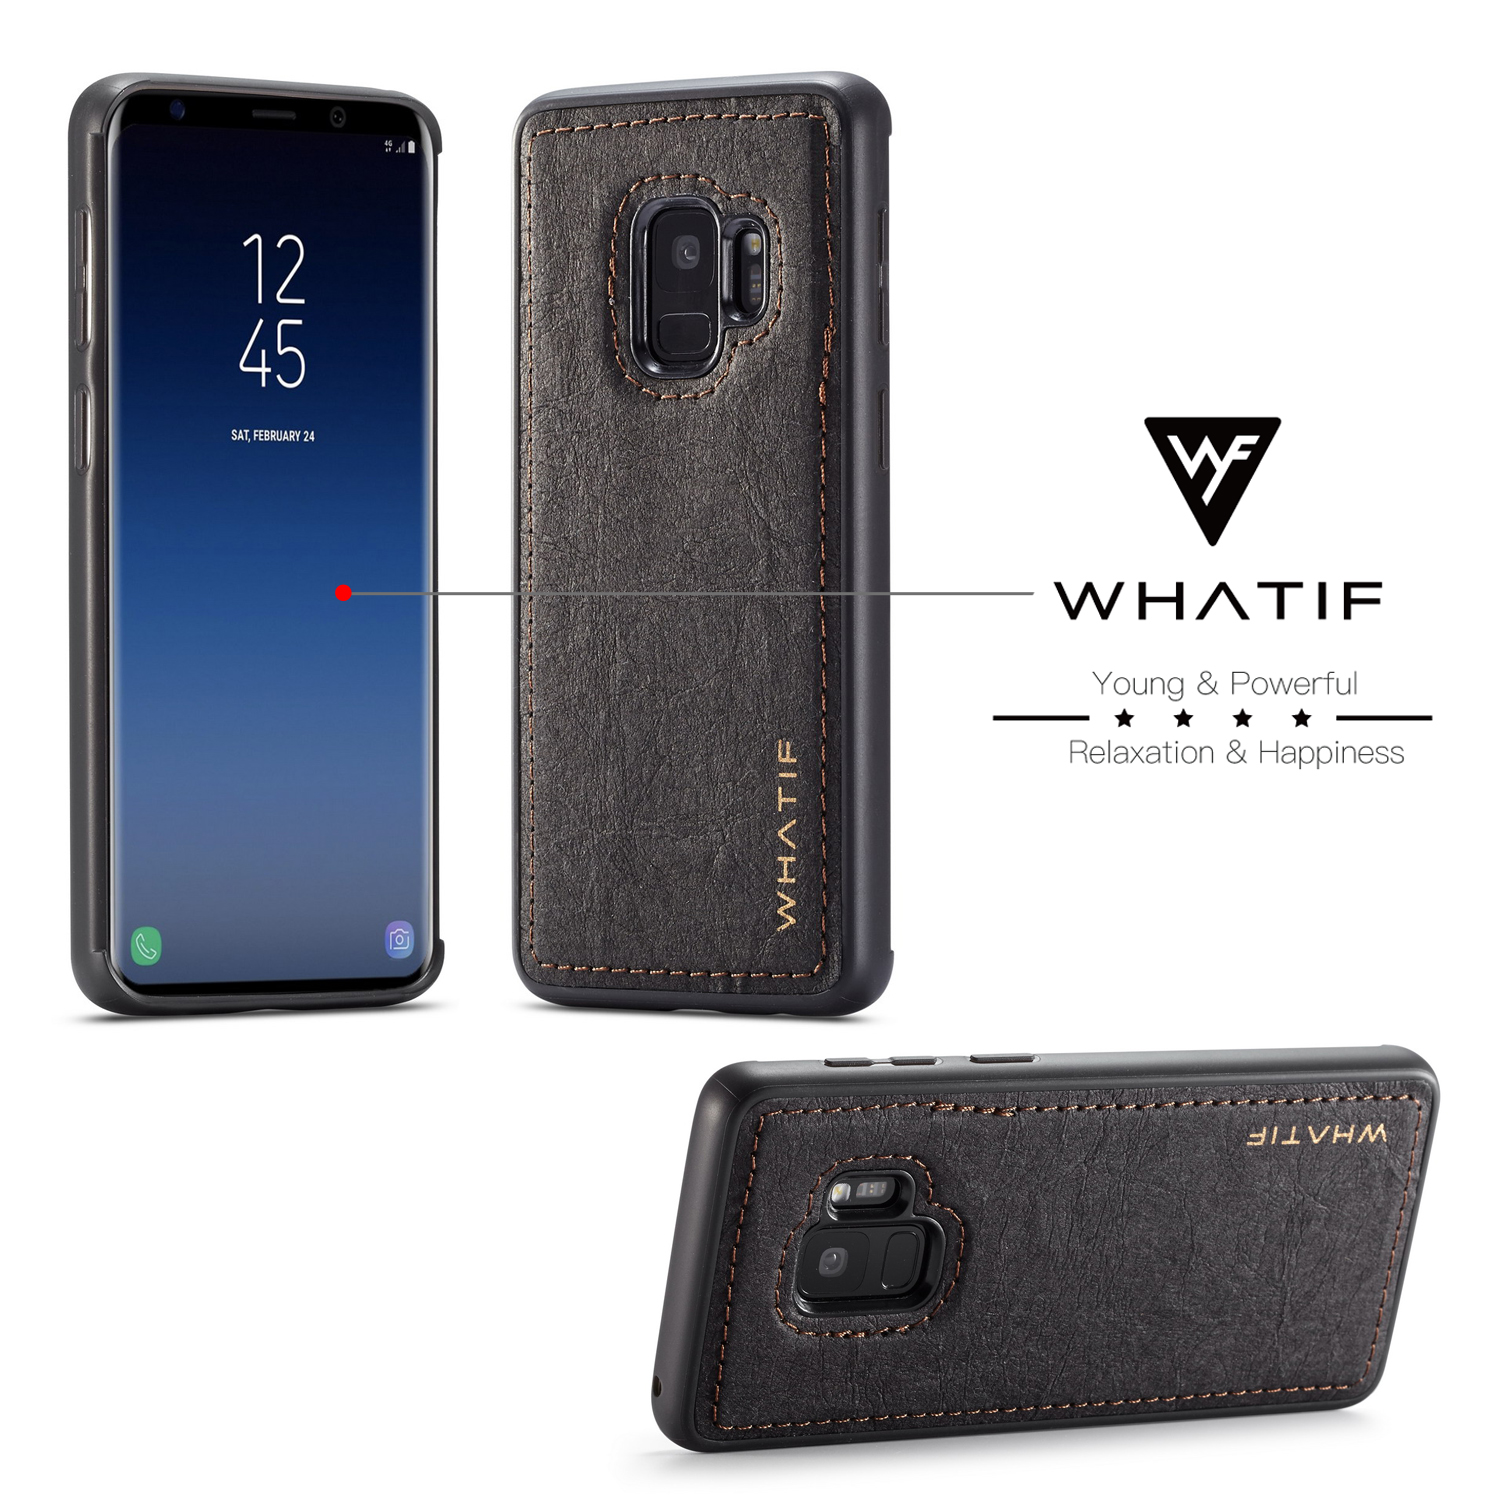 WHATIF-Waterproof-Shockproof-Protective-Case-For-Samsung-Galaxy-S9-1286565-2